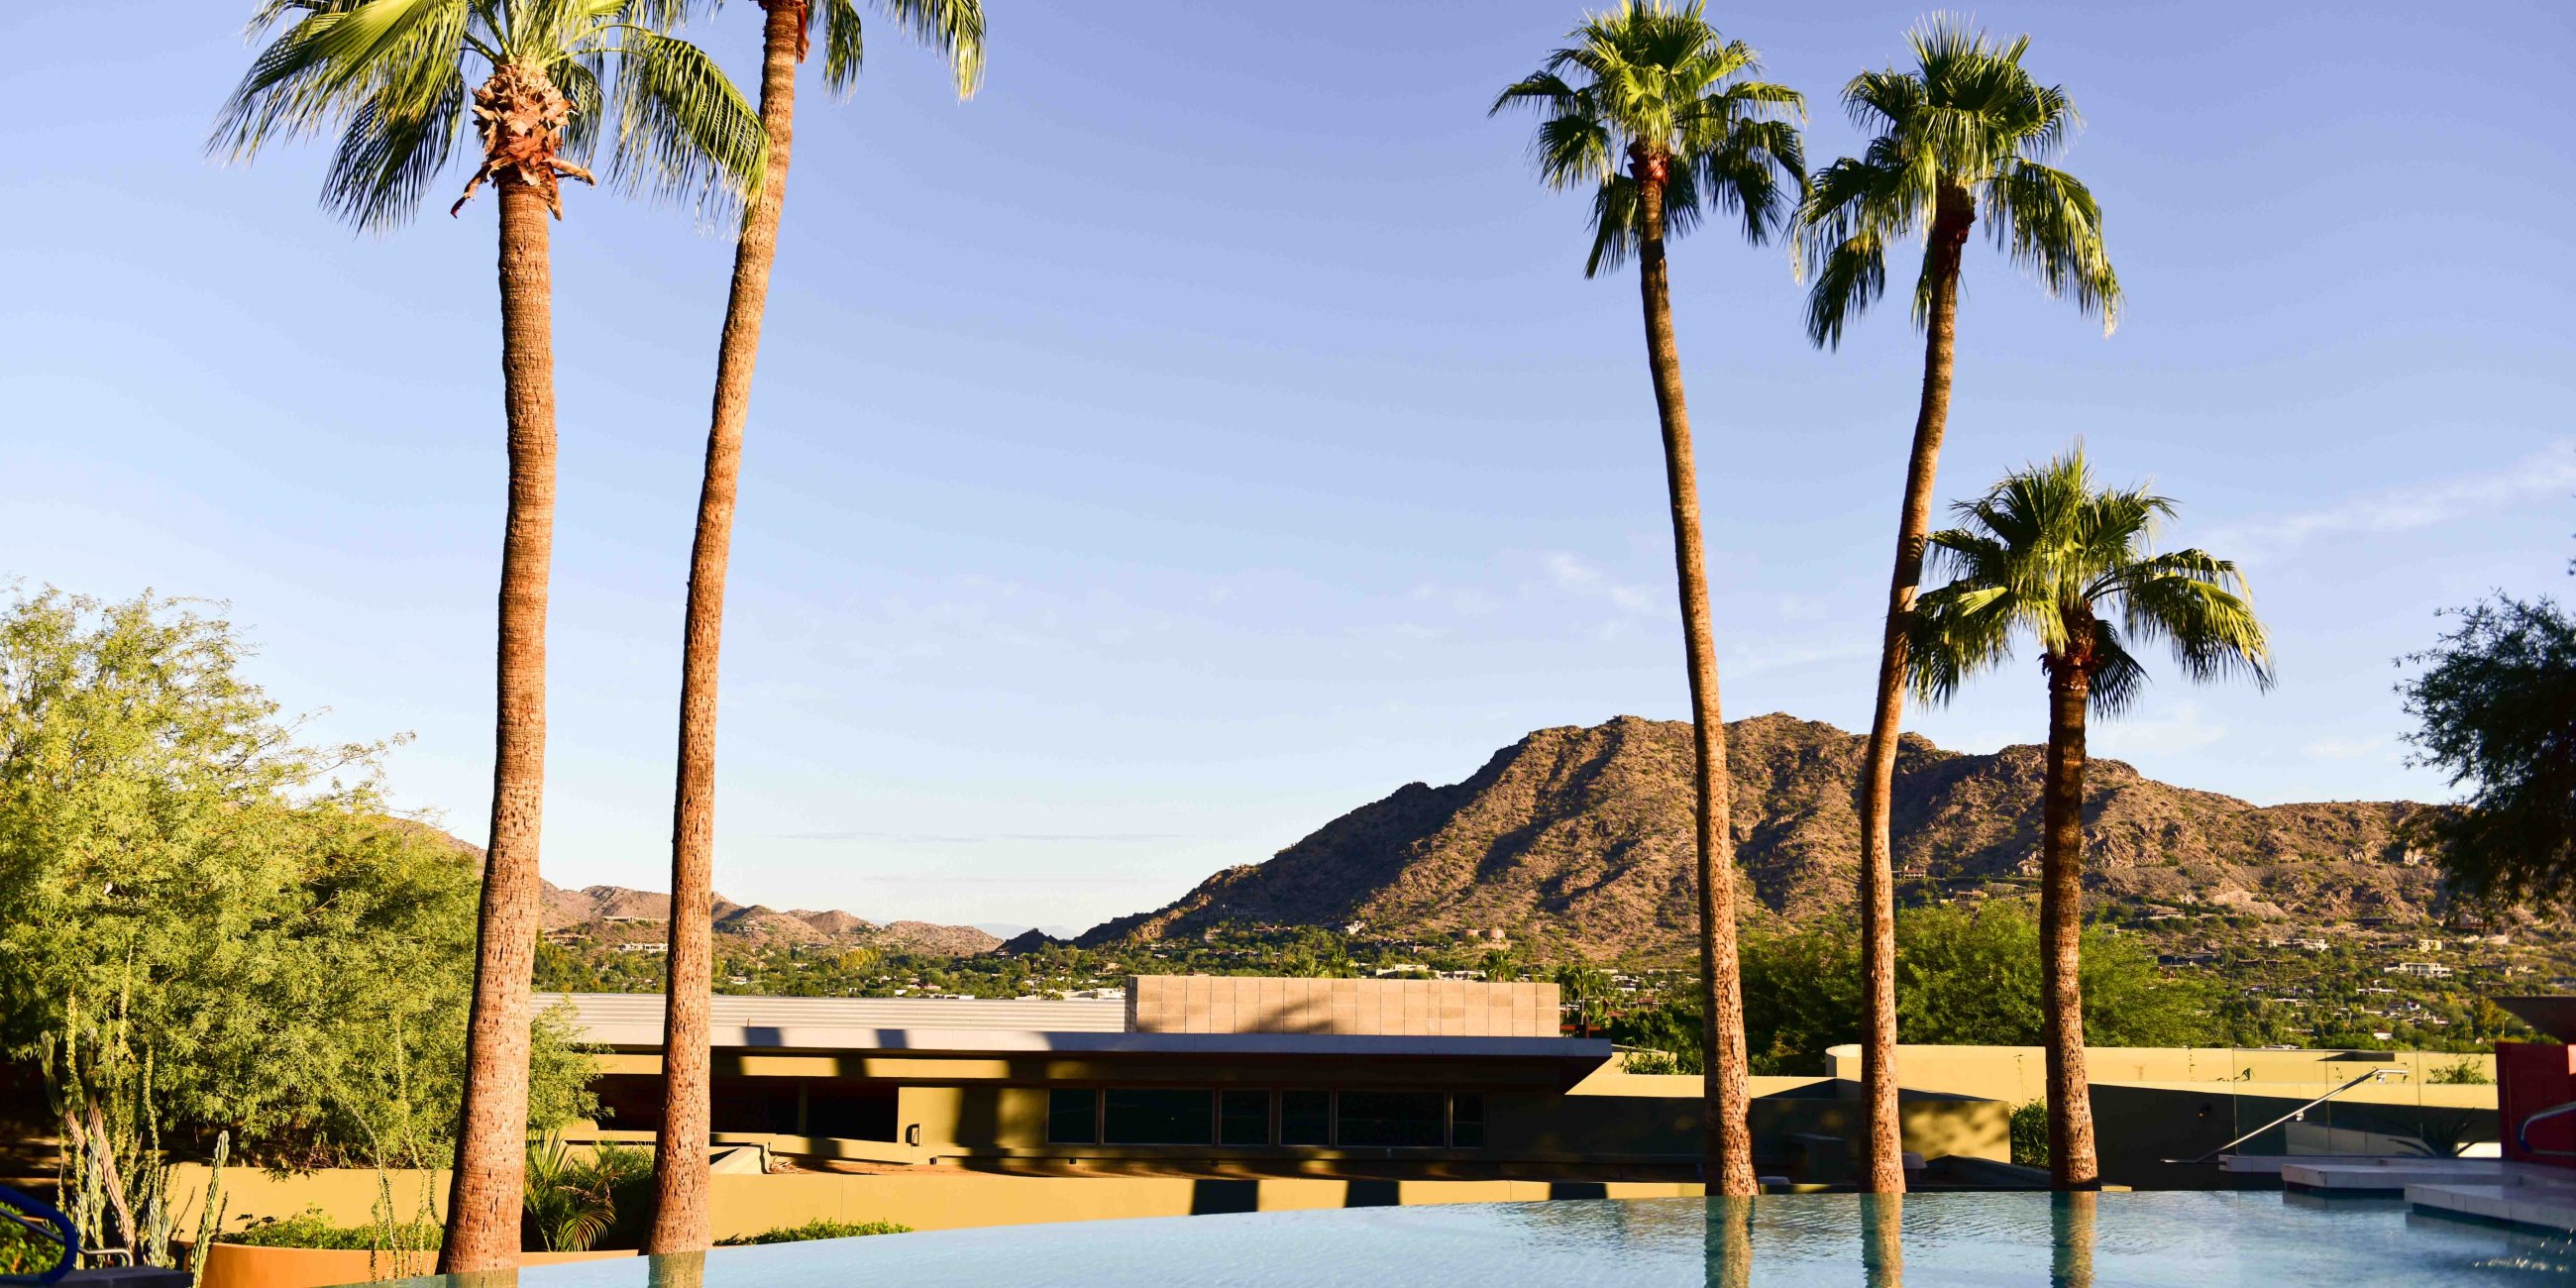 Sunrise over Sanctuary's Infinity Pool with palm trees and stunning mountain views.